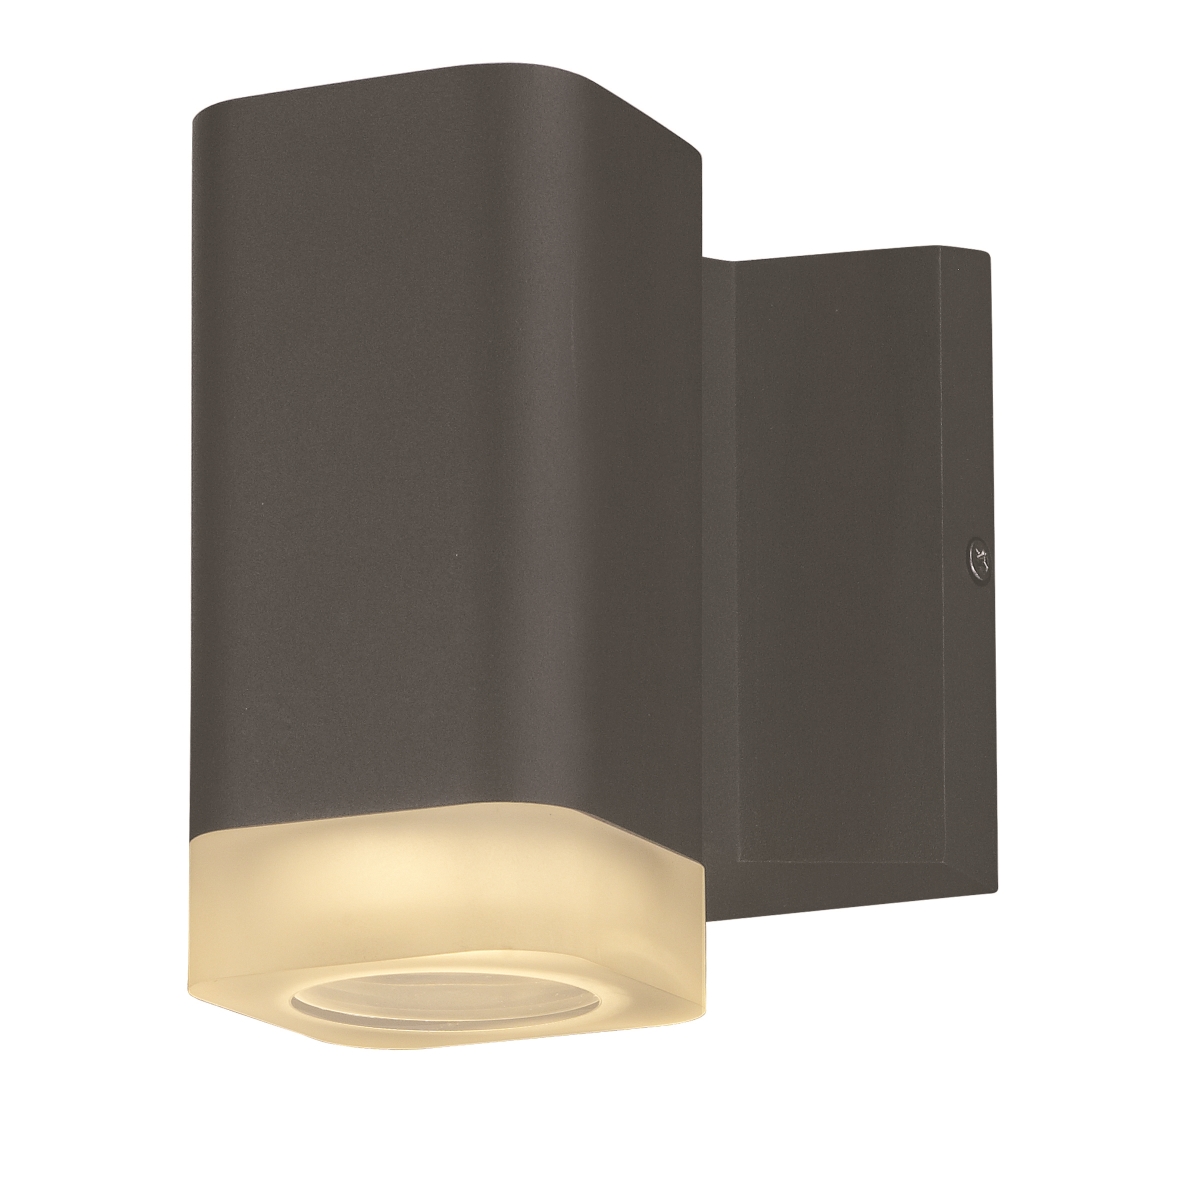 86131abz 5 In. Lightray Led Wall Sconce - Architectural Bronze